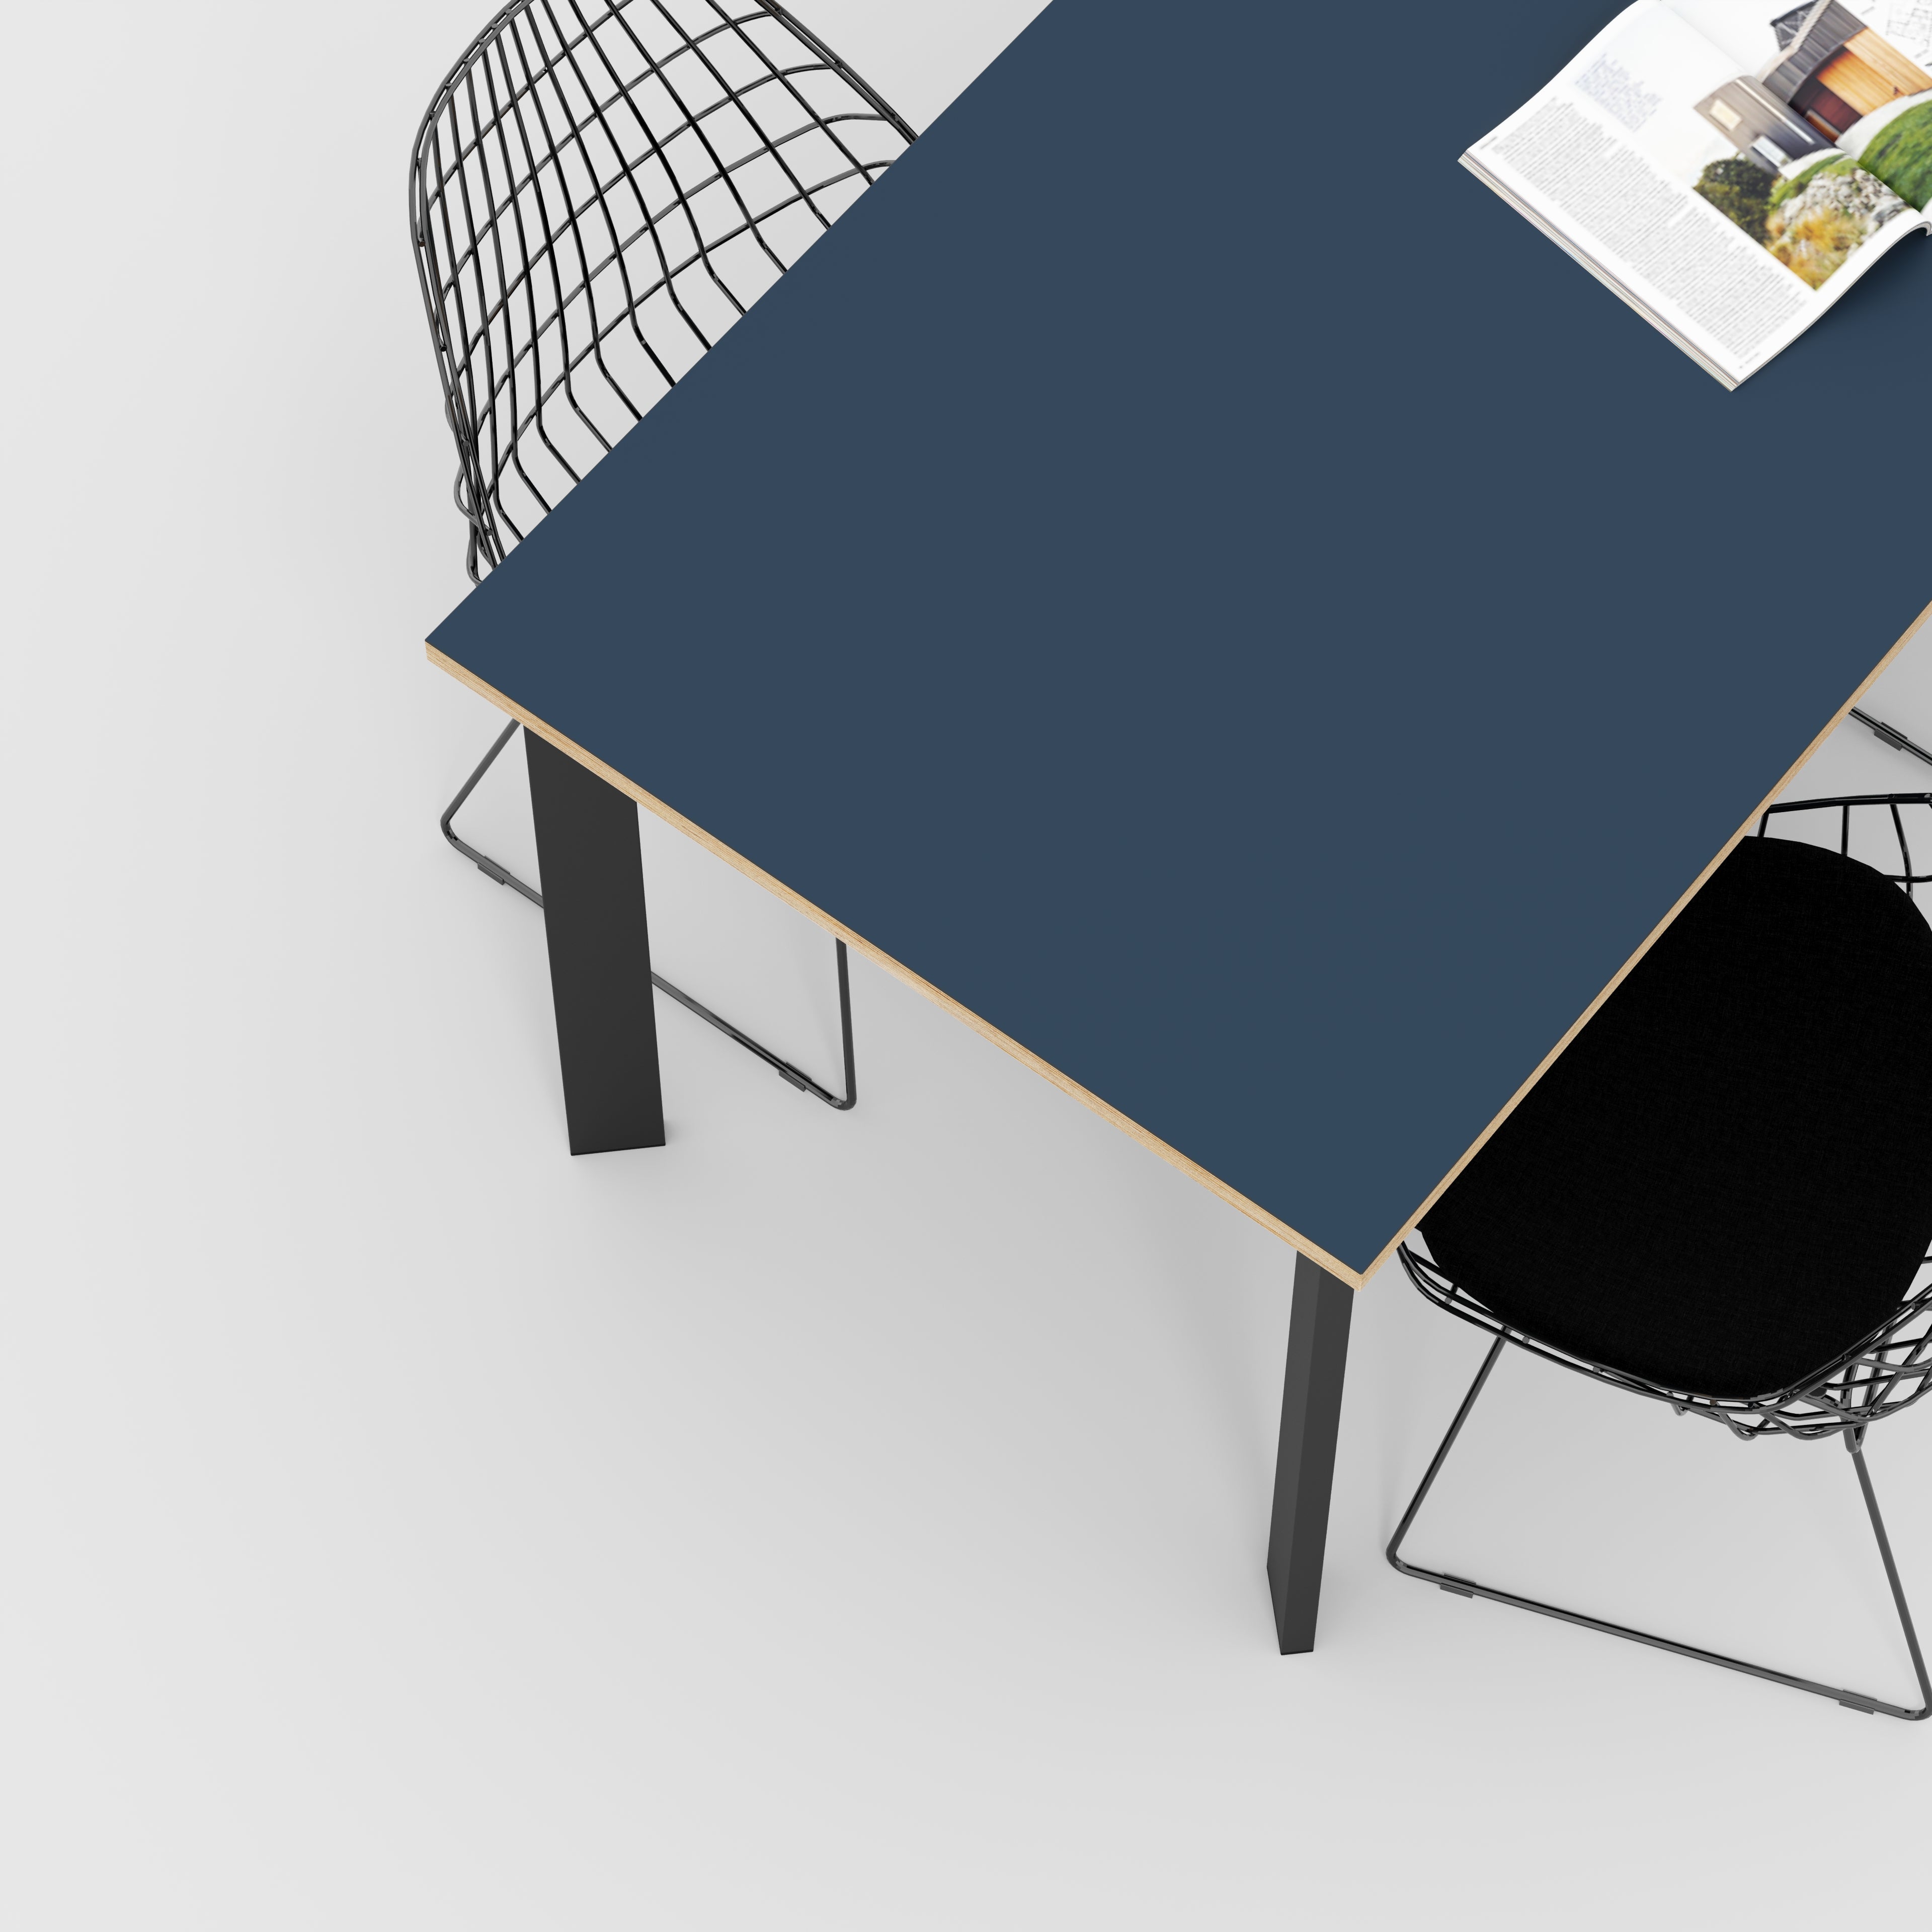 Table with Black Rectangular Single Pin Legs - Formica Night Sea Blue - 1600(w) x 800(d) x 735(h)